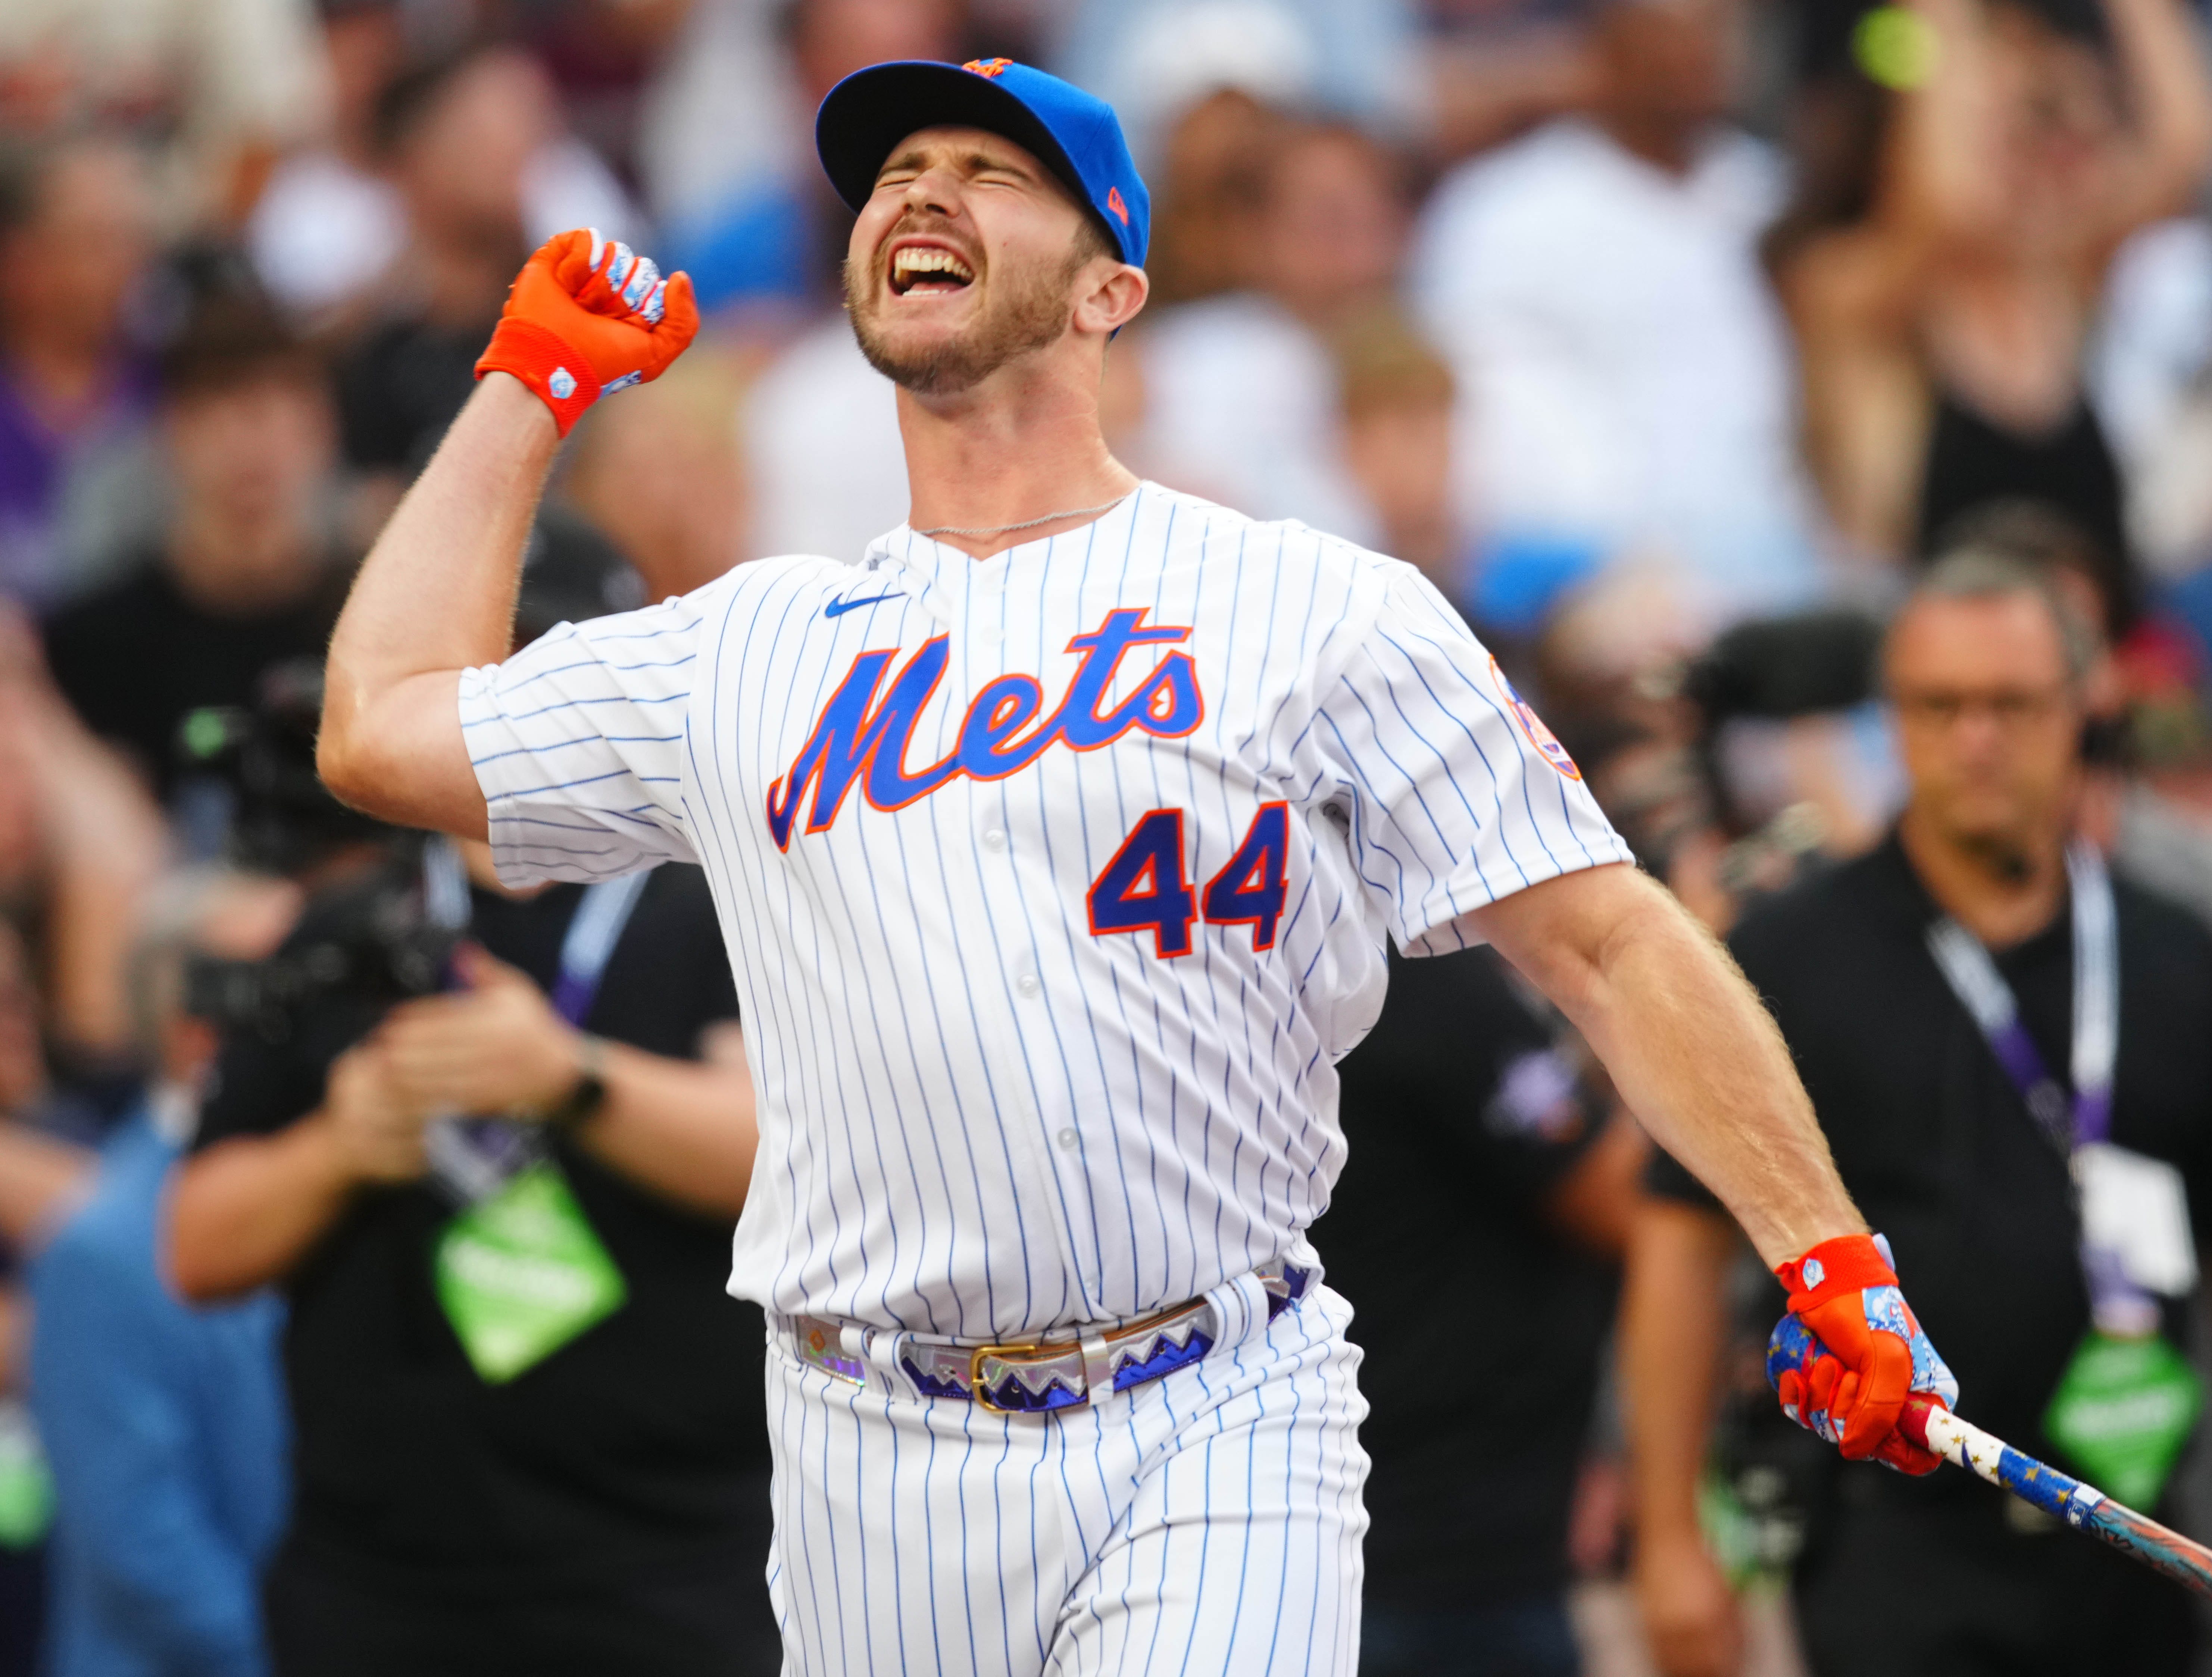 Home Run Derby NY Mets star Pete Alonso wins second title in Colorado